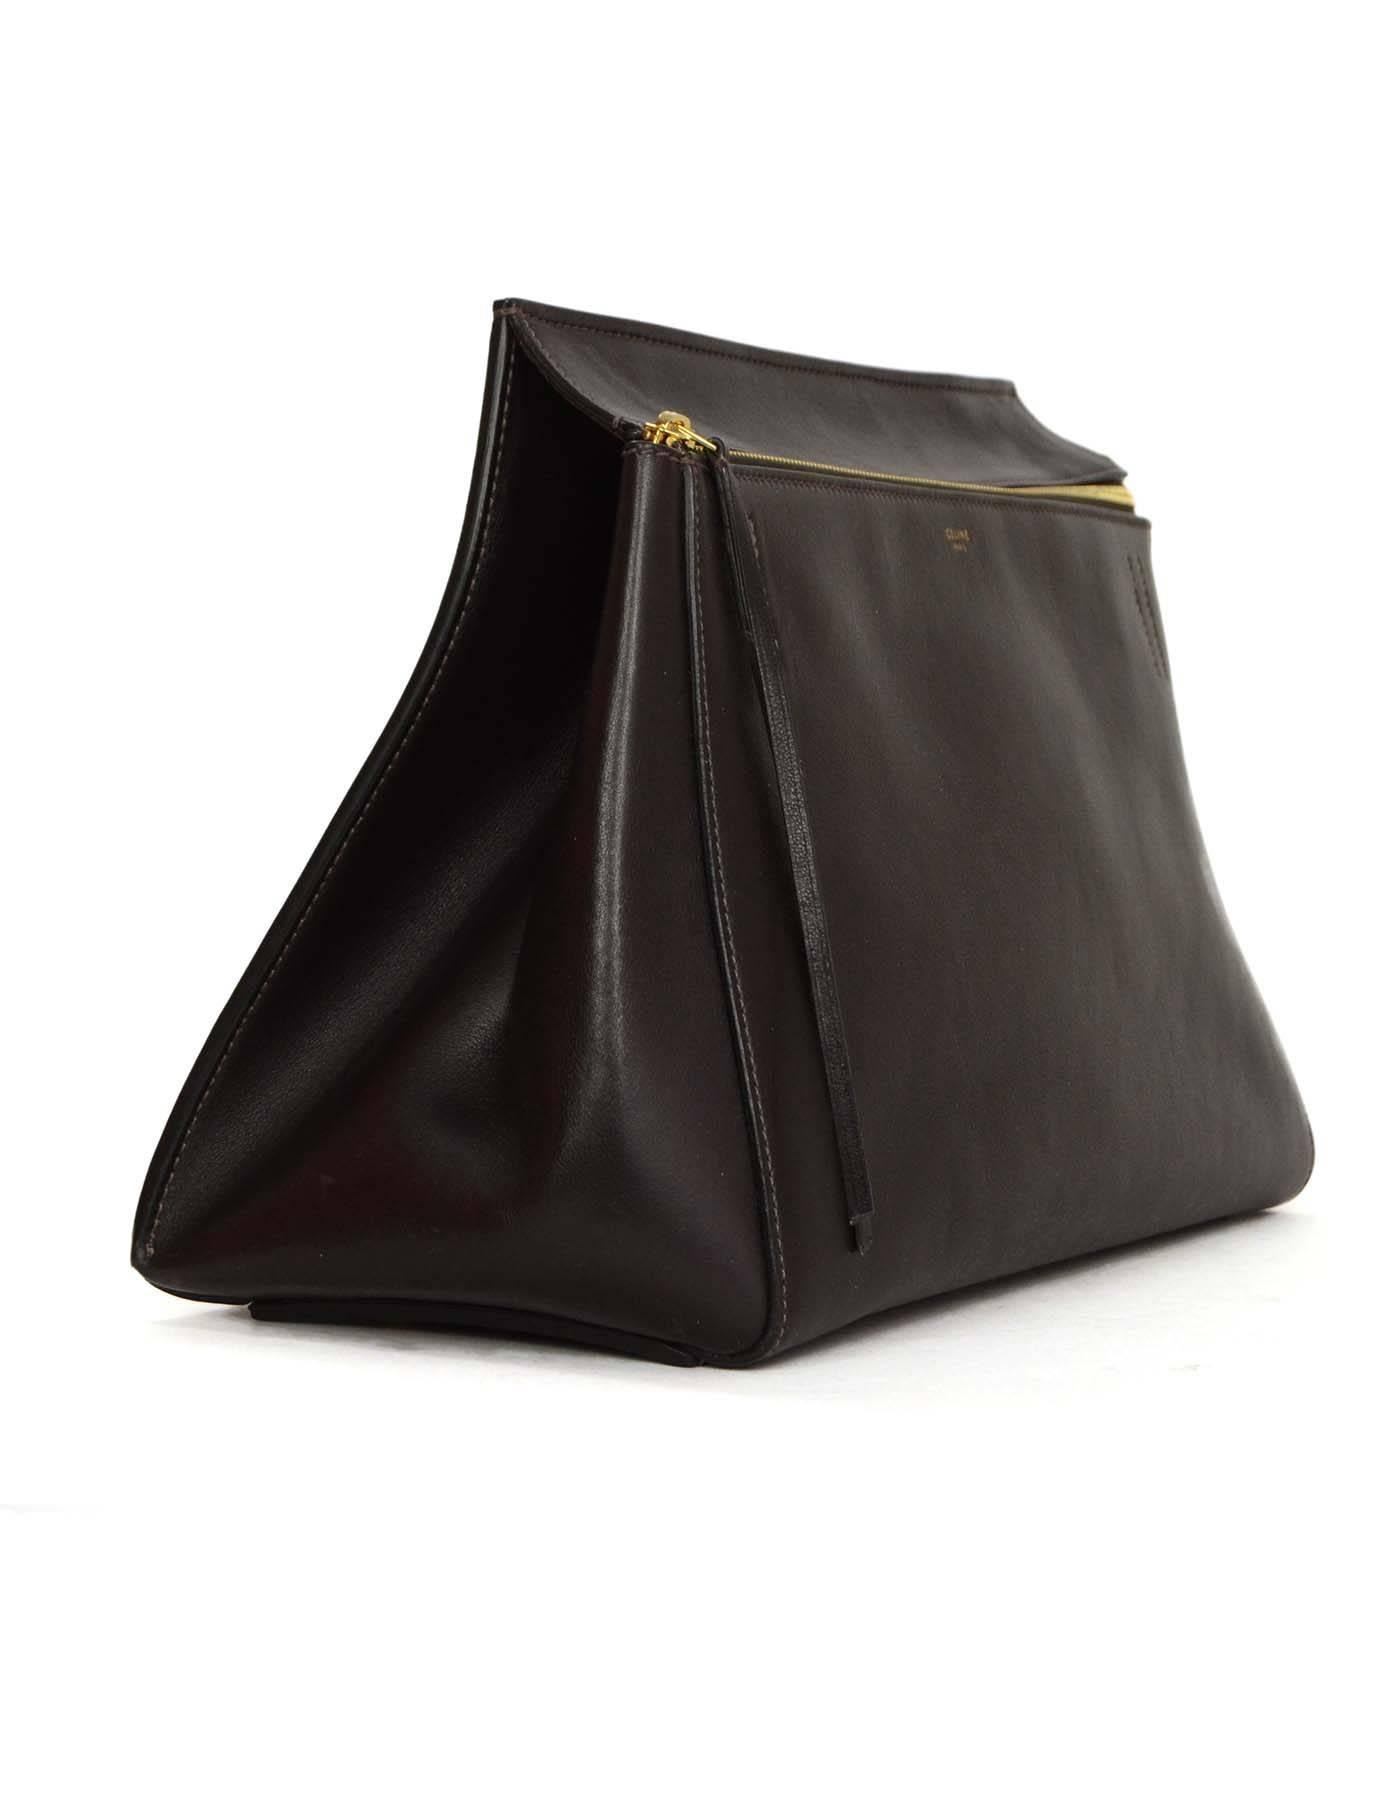 Celine Brown Leather 'Edge' Tote
Made In: Italy
Color: Dark brown
Hardware: Goldtone
Materials: Leather
Lining: Brown suede
Closure/Opening: Zip across top
Exterior Pockets: Back patch pocket
Interior Pockets: Two flat pockets, and one